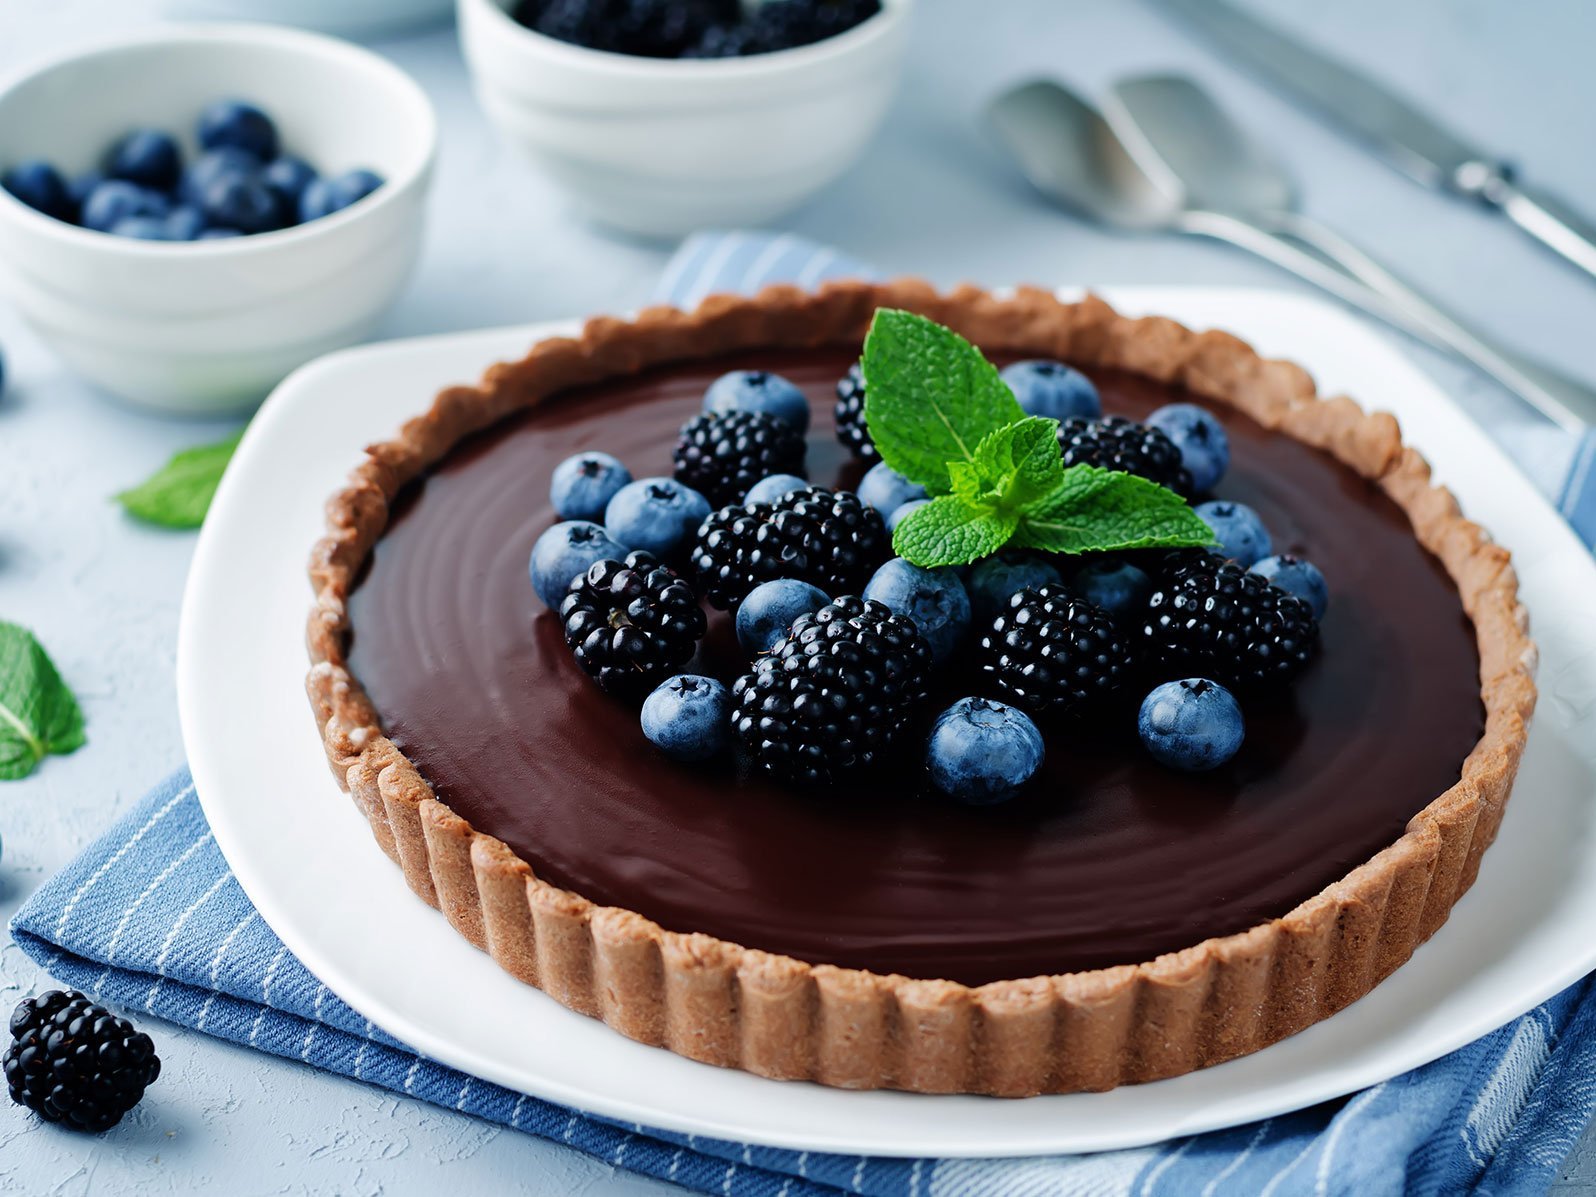 Chocolate Tart With Blackberries And Blueberries.